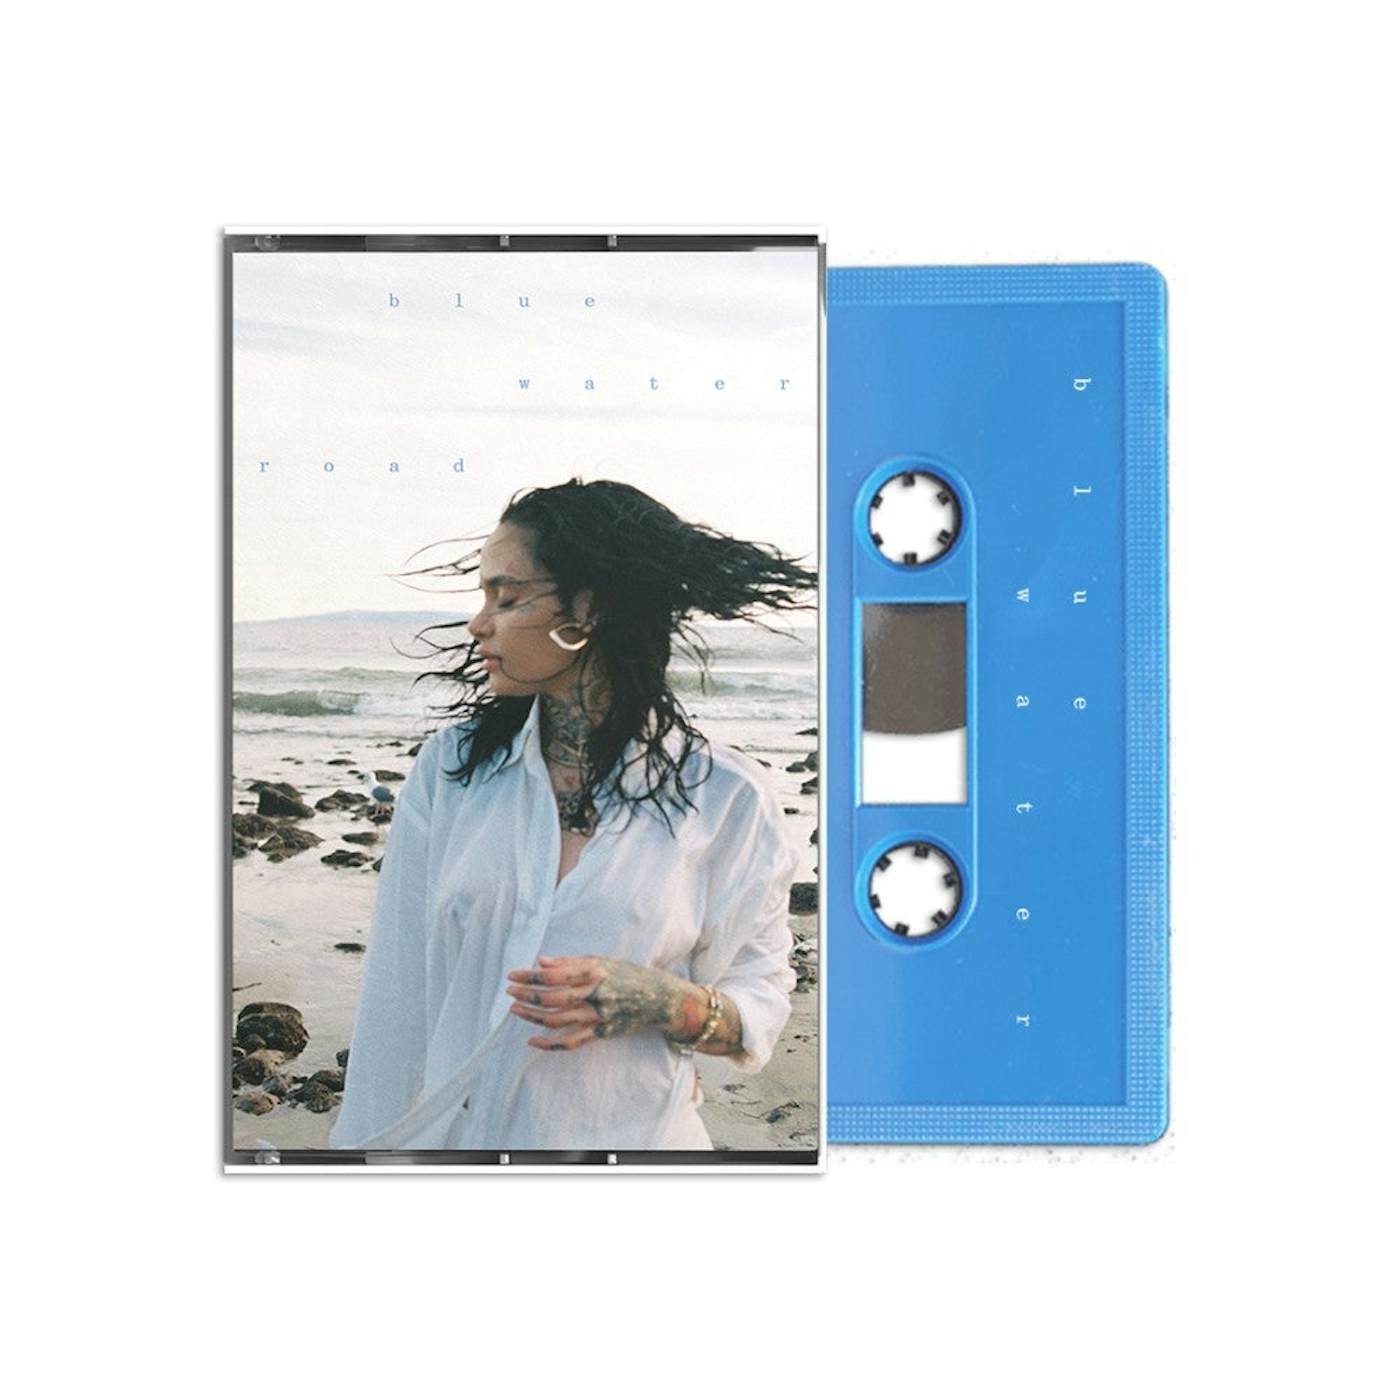 Kehlani blue water road recycled blue cassette